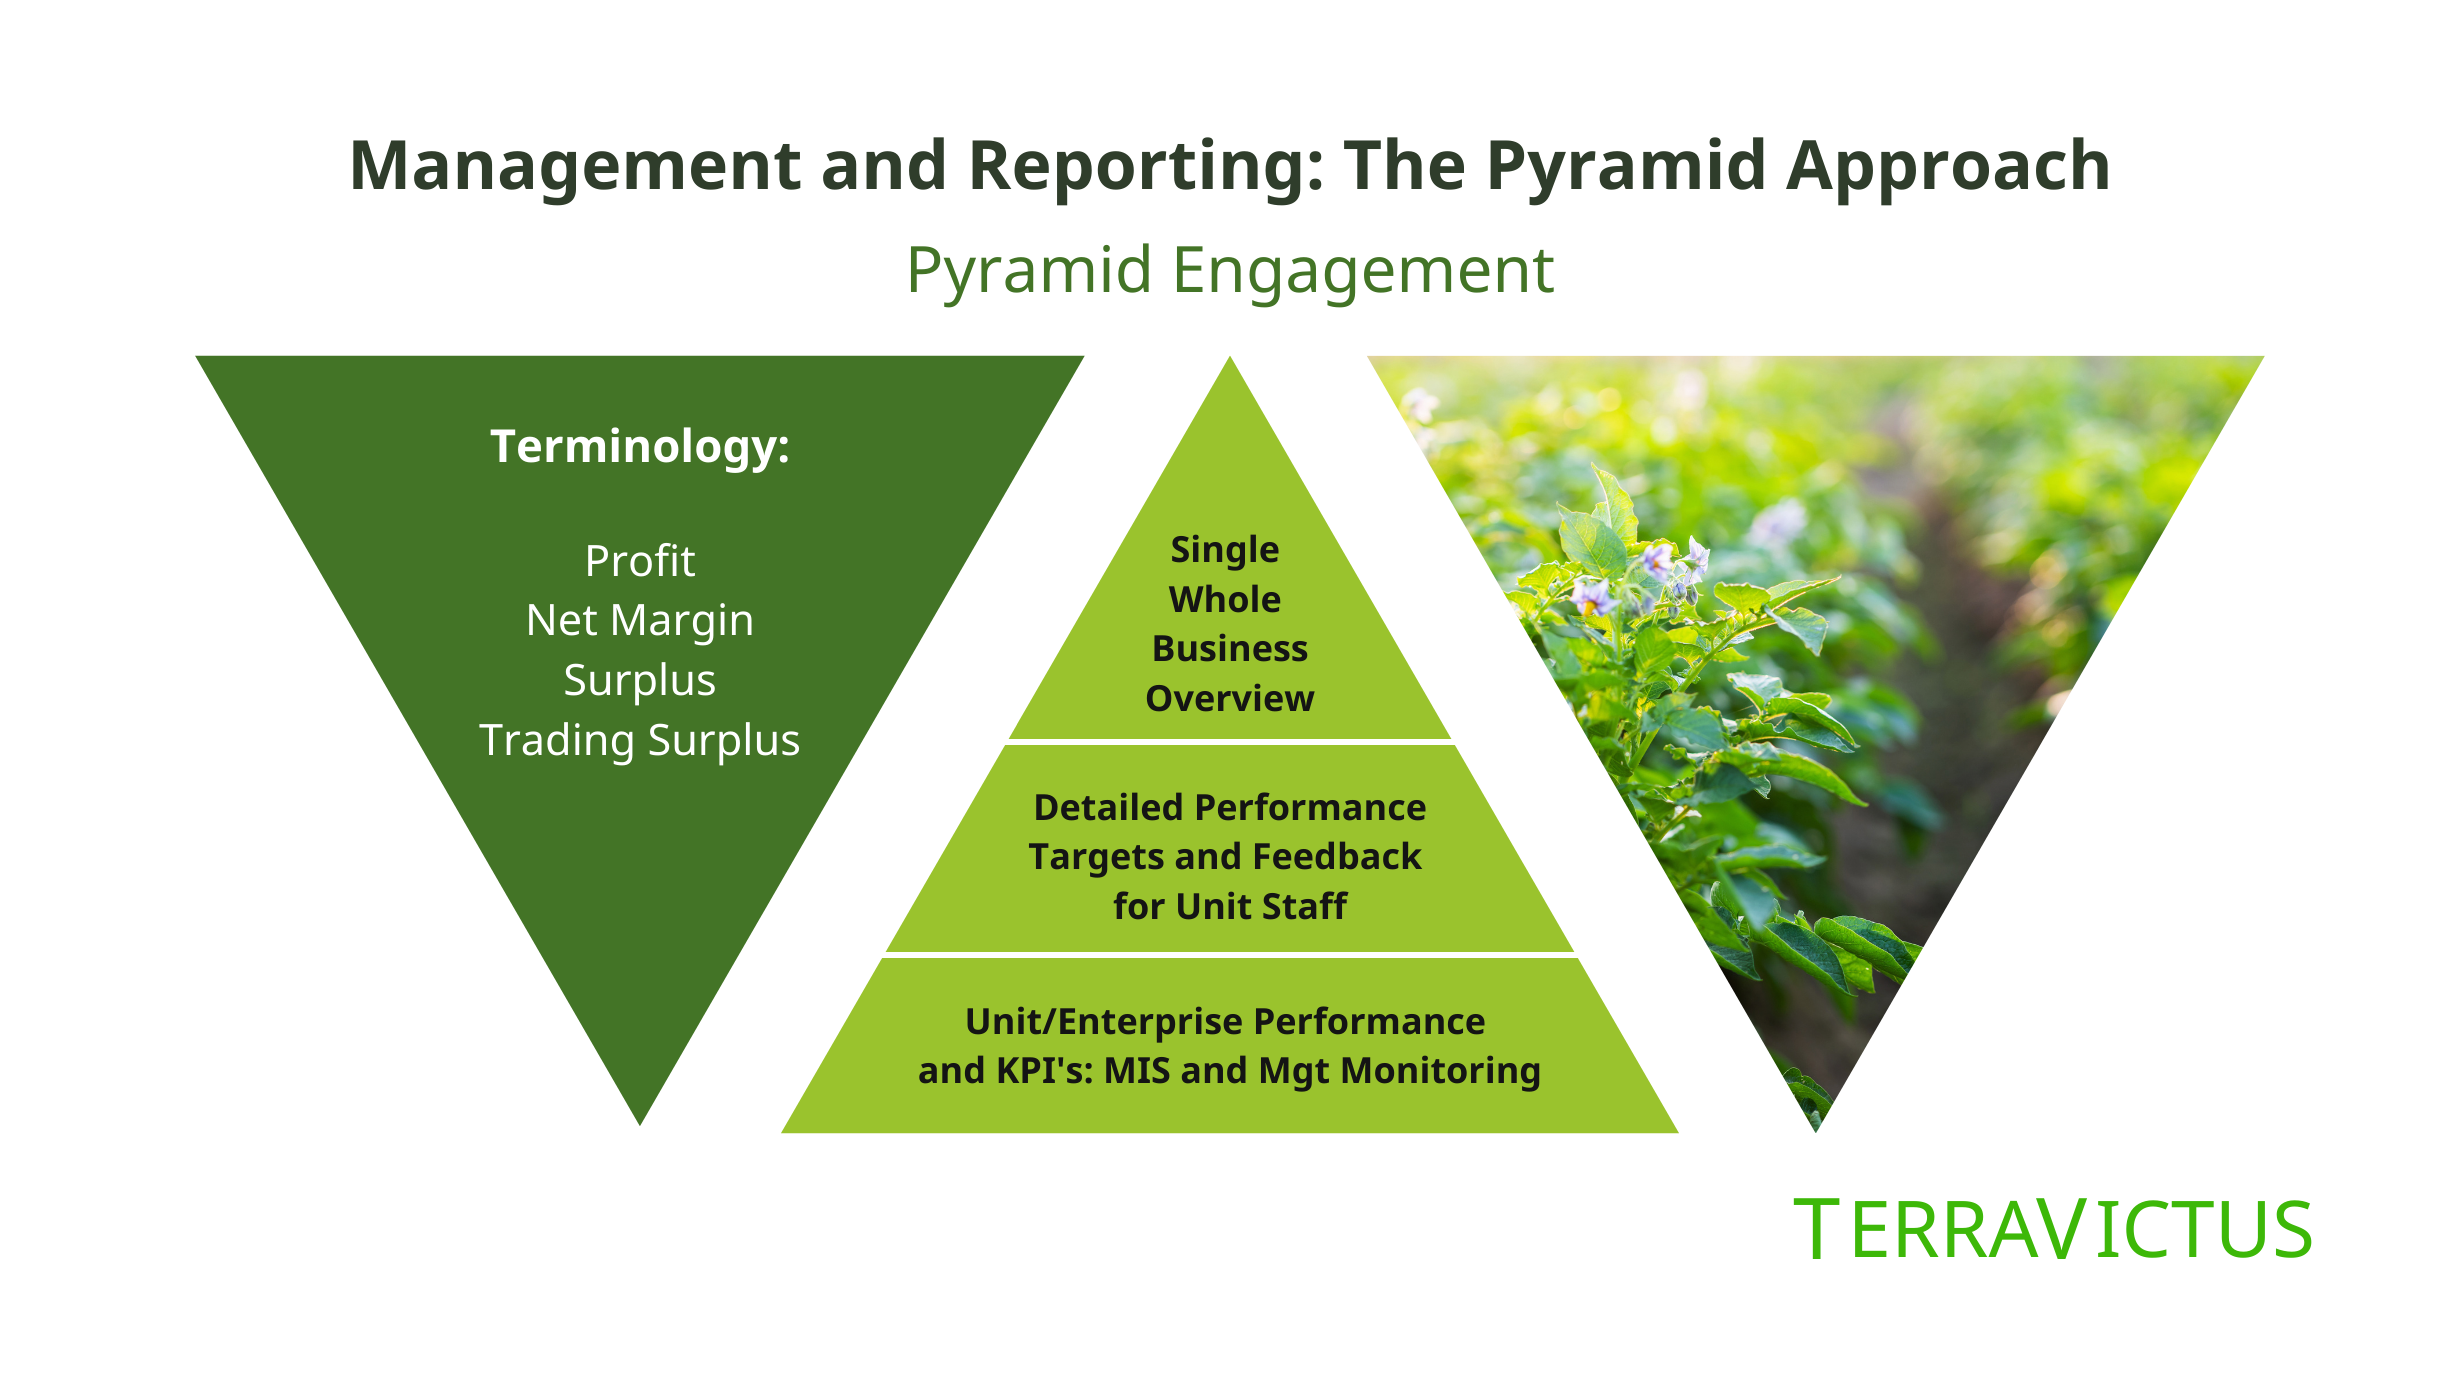 Management and reporting, the pyramid approach. Pyramid engagement. Triangle 1:Terminology: profit, net margin, surplus, trading surplus. Triangle 2: Single whole business overview, detailed performance, targets and feedback for unit staff, unit/enterprise performance and kpis: mis and mgt monitoring.